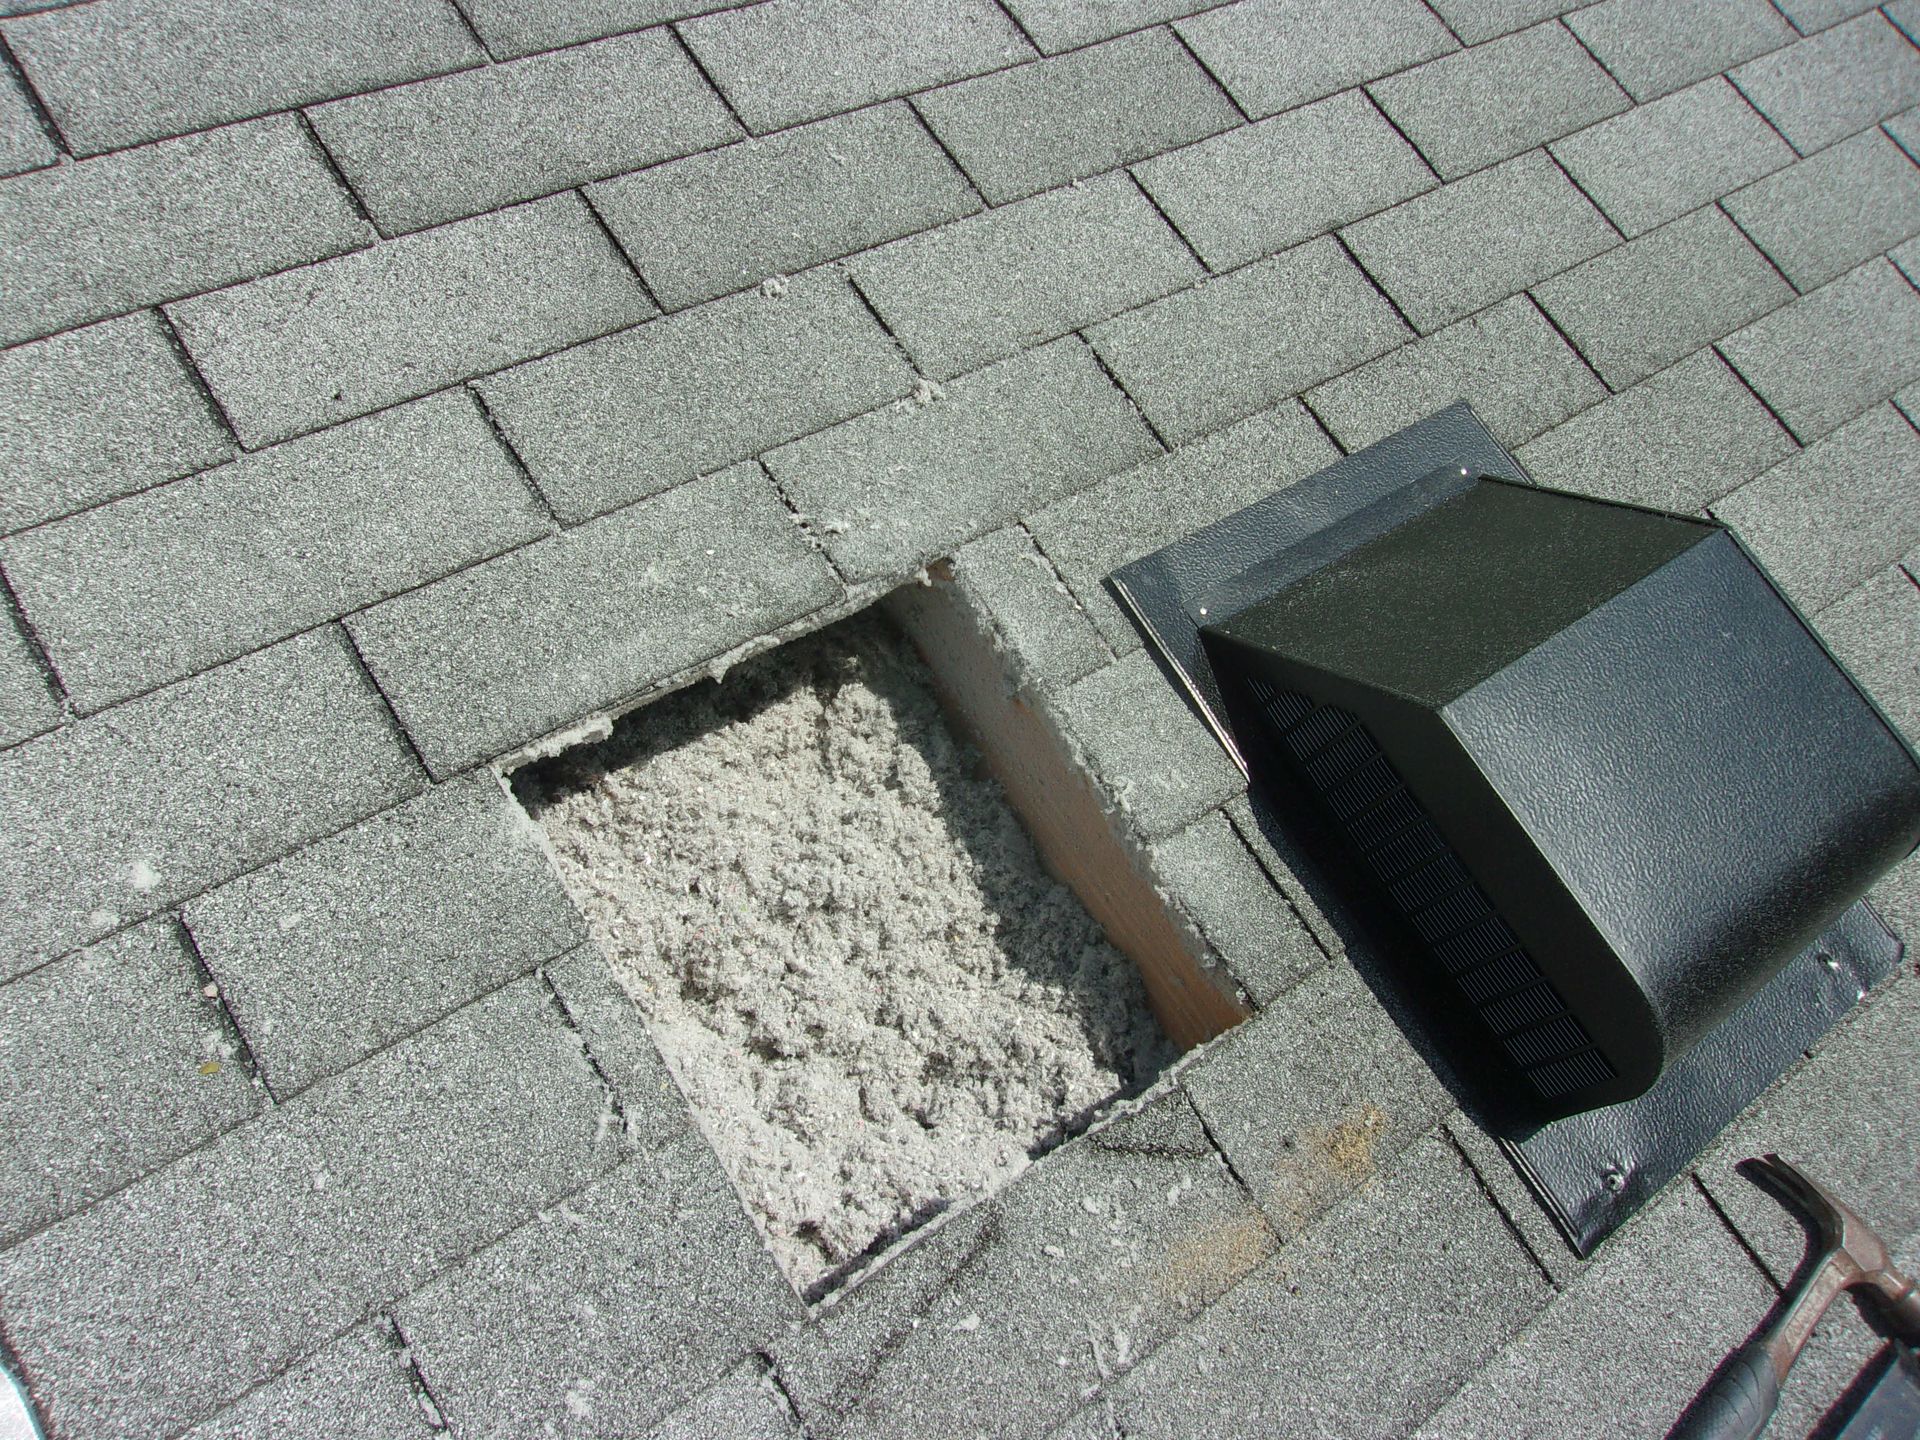 Vent ready to be installed on top of an attic eave to allow vapors to escape the attic